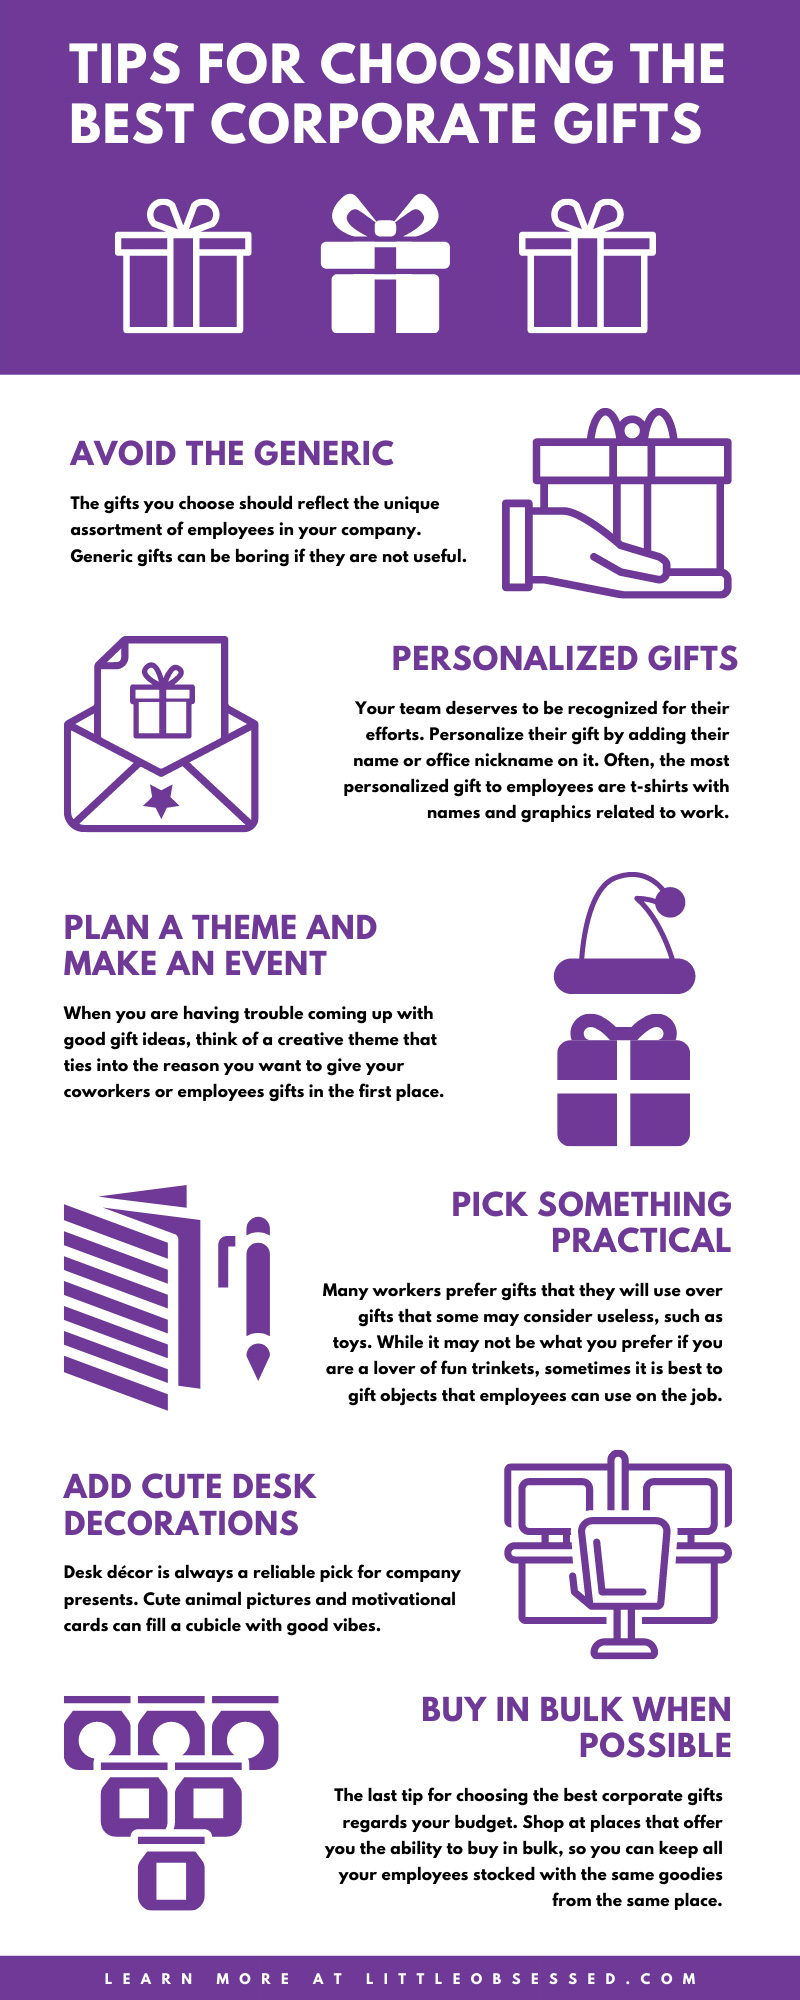 Choosing the Best Corporate Gifts